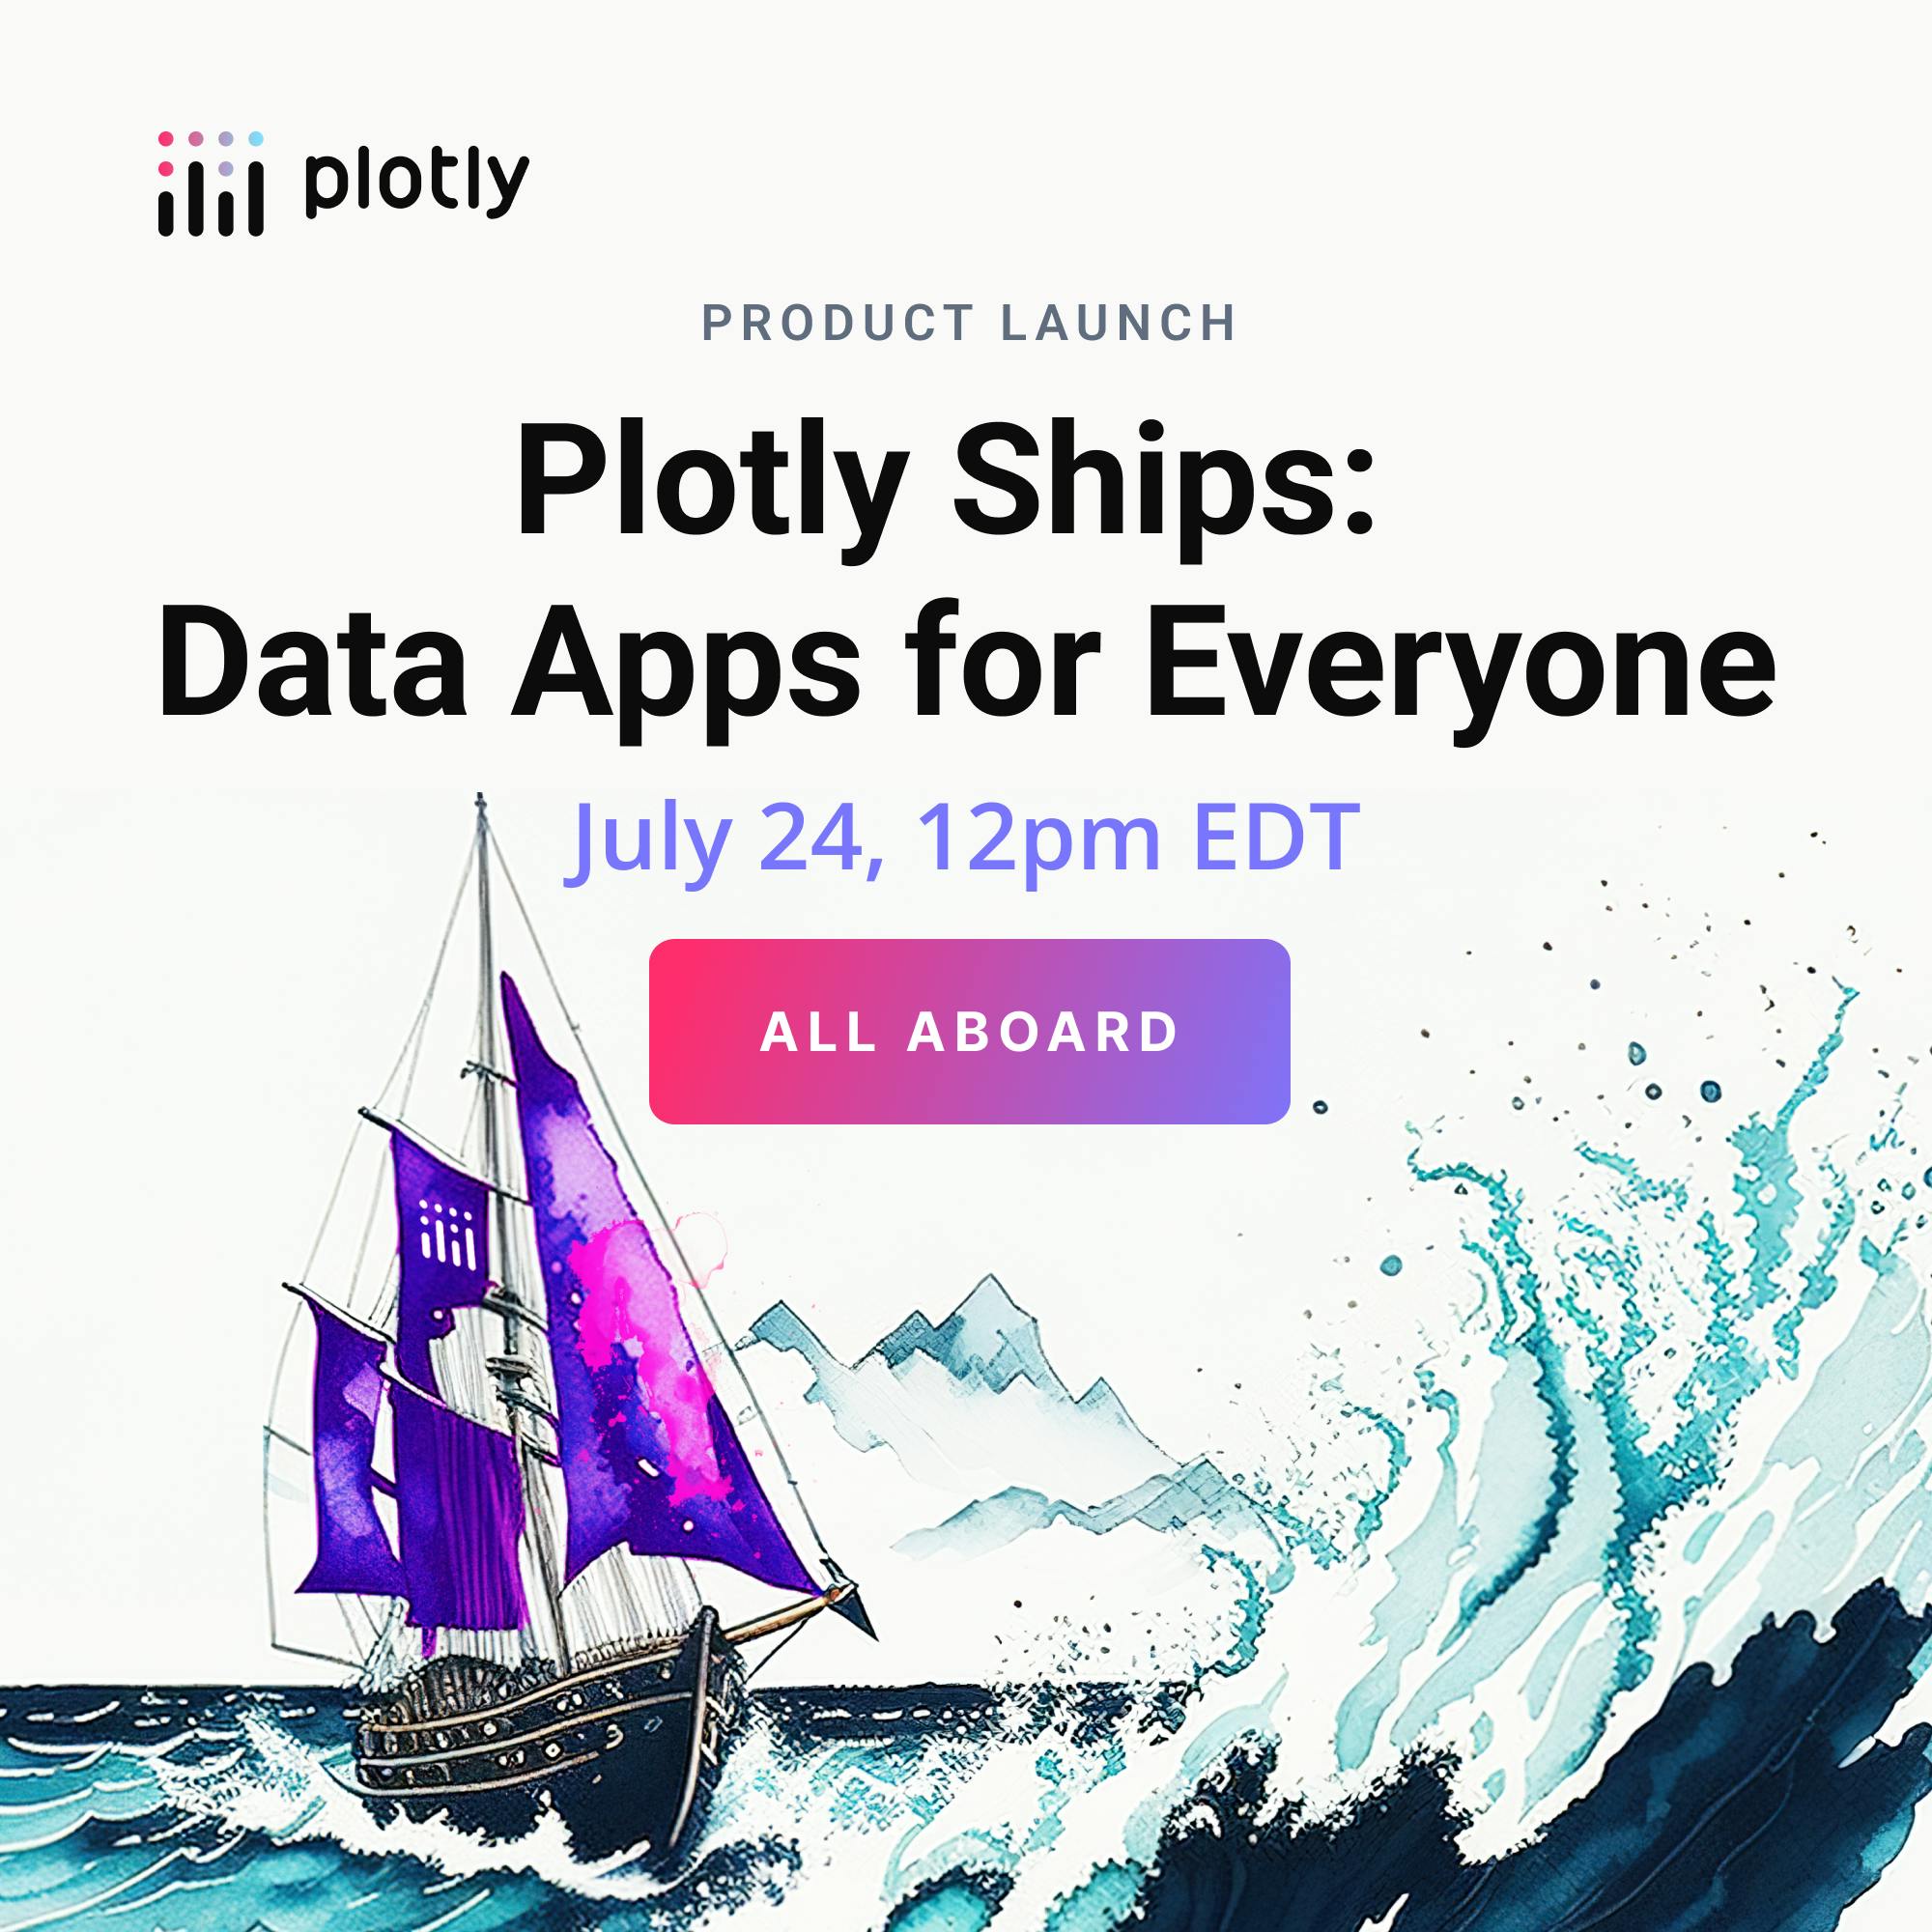 Get your pass to navigate new waters with data apps. Join the product launch on July 24!